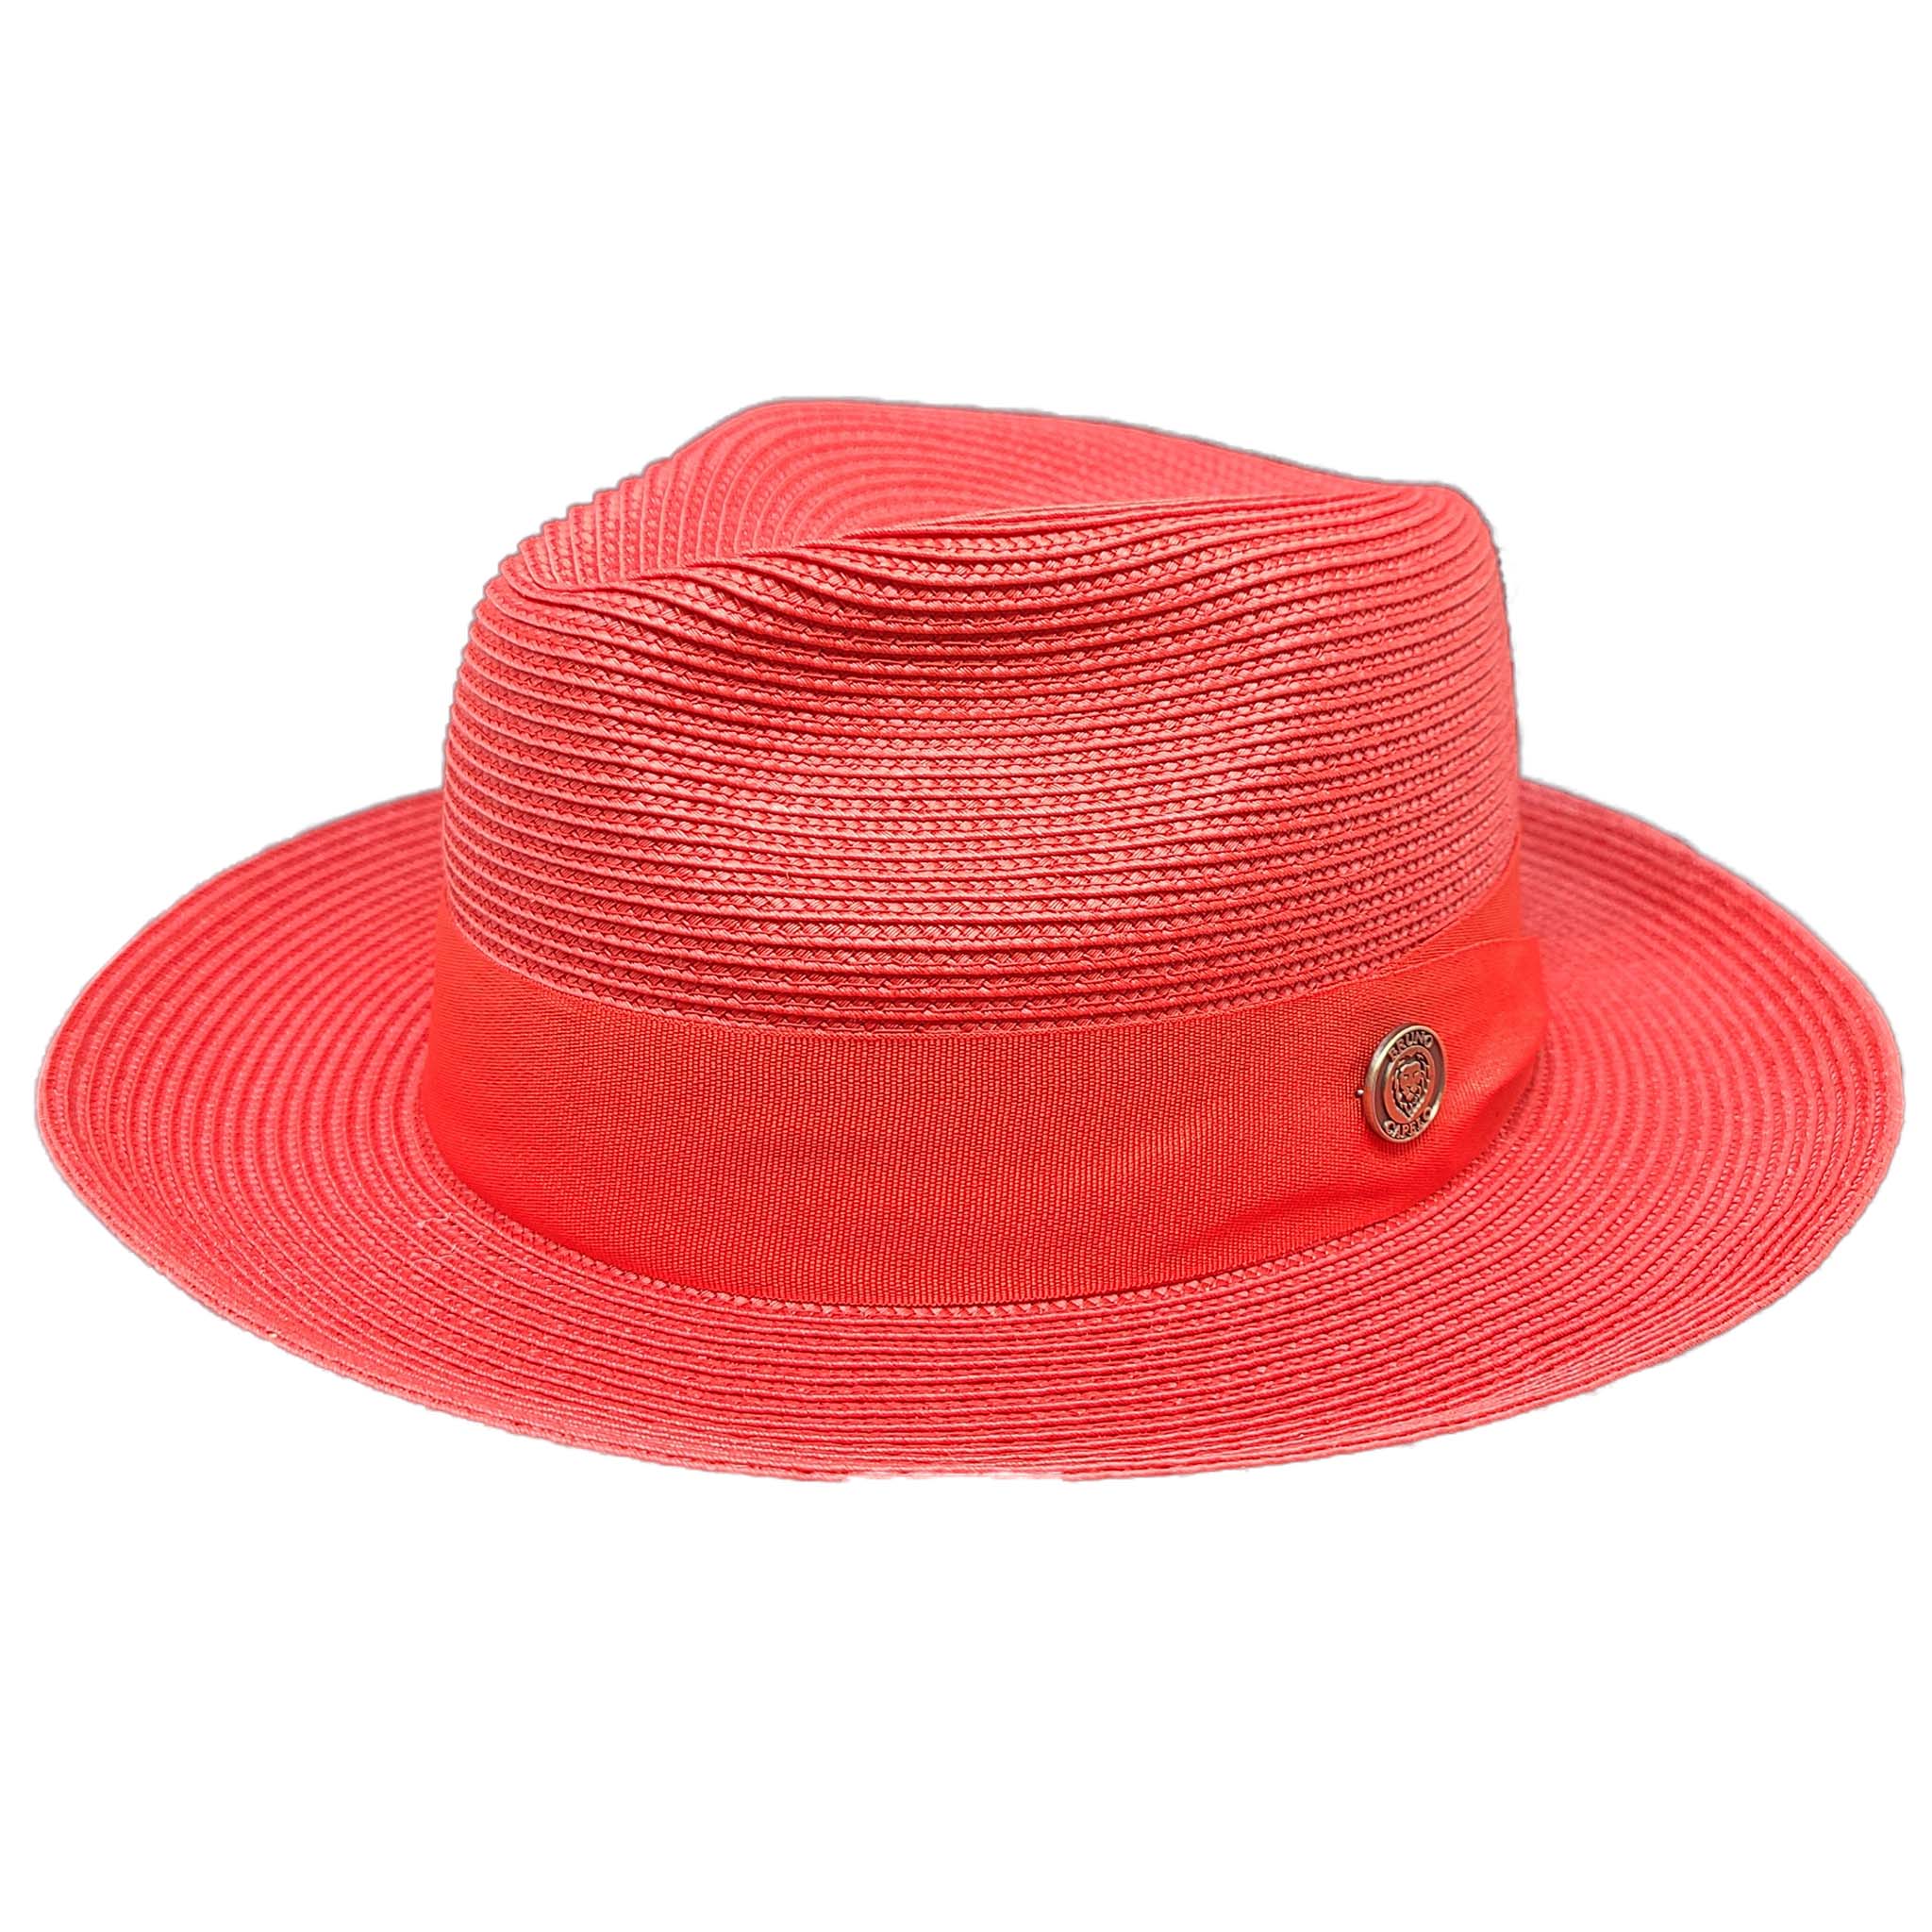 Red Straw Fedora Hat - Side View